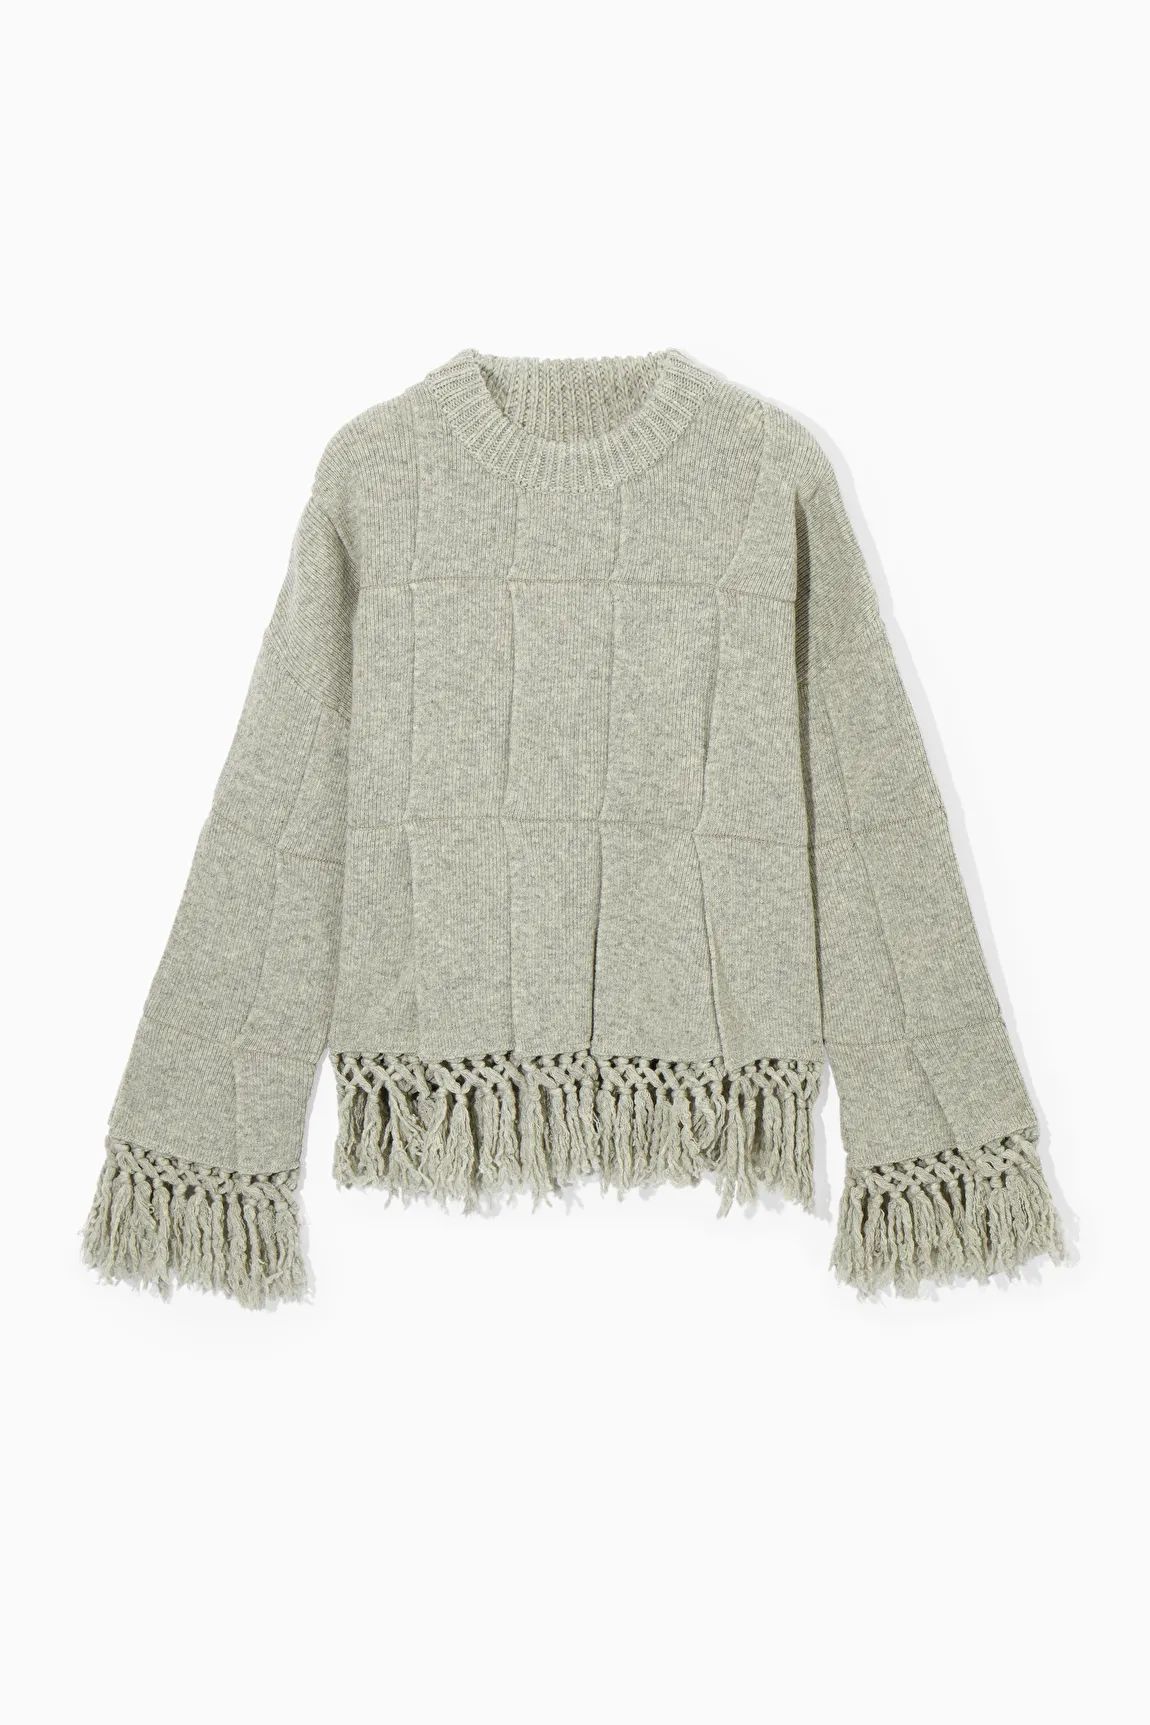 FRINGED PANELED WOOL SWEATER - LIGHT GRAY MÉLANGE - Knitwear - COS | COS (US)